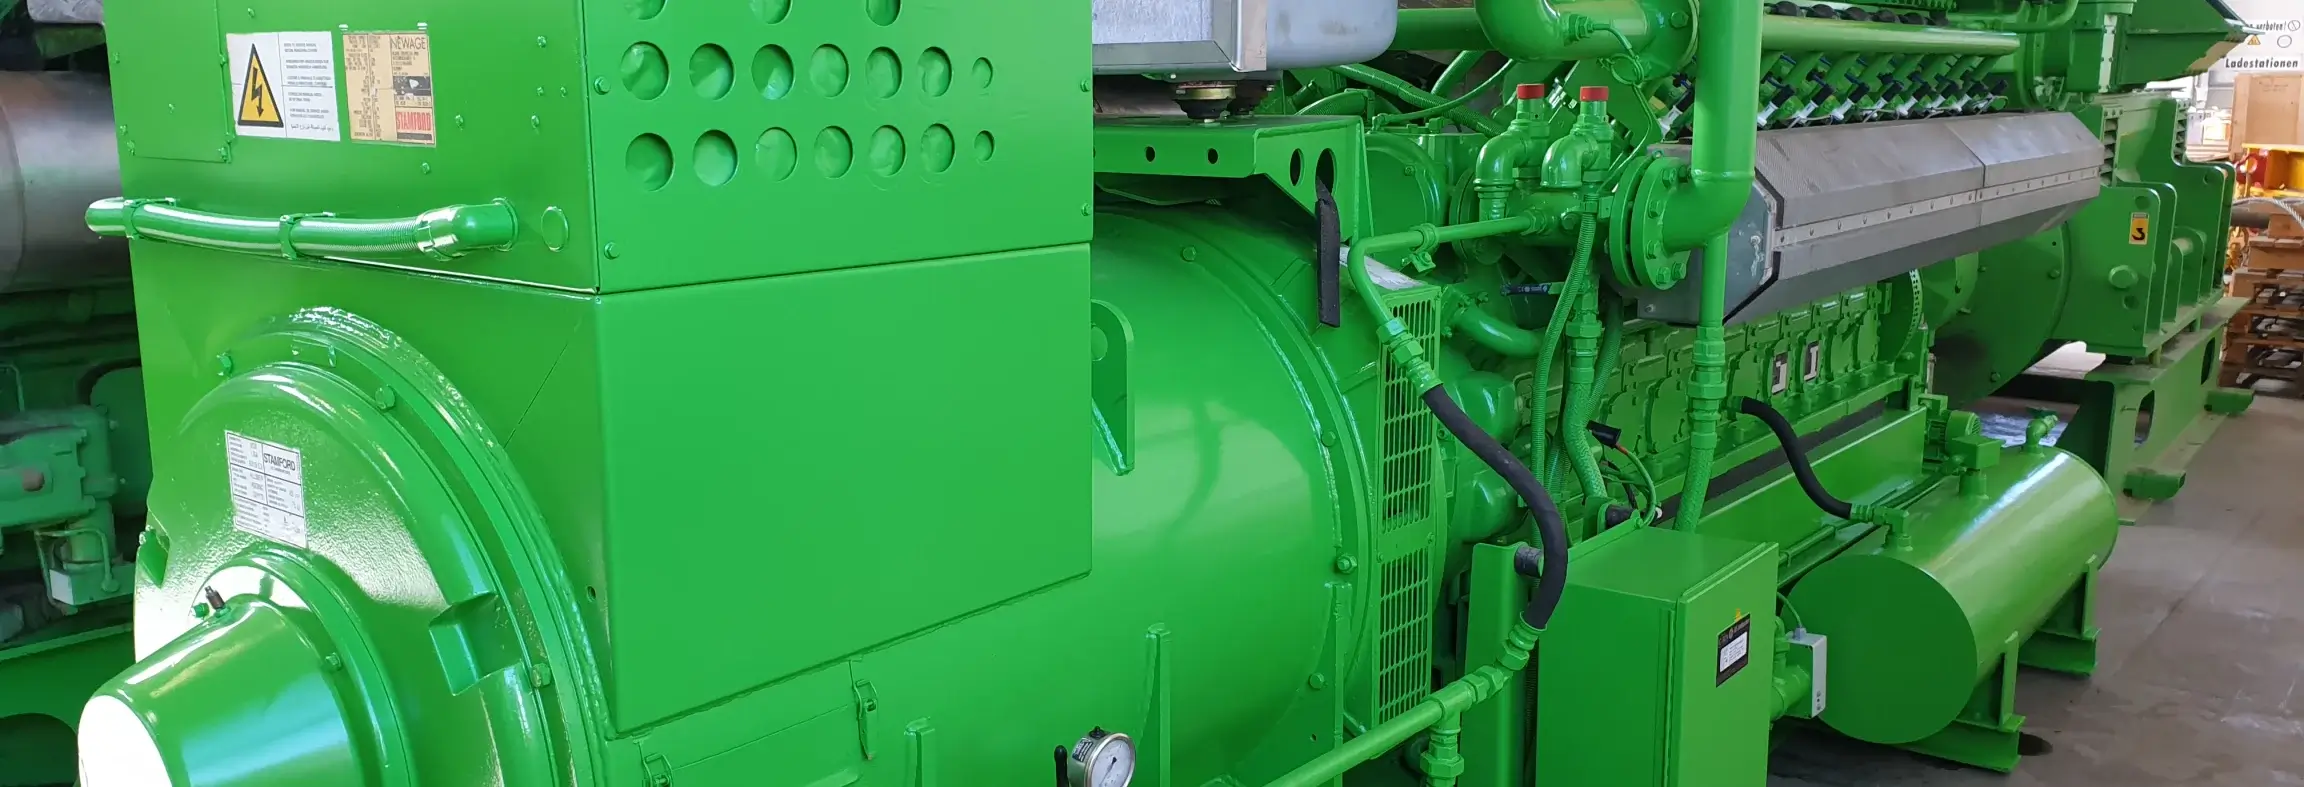 Buy a used Gas Engine, Gas Generator or Genset